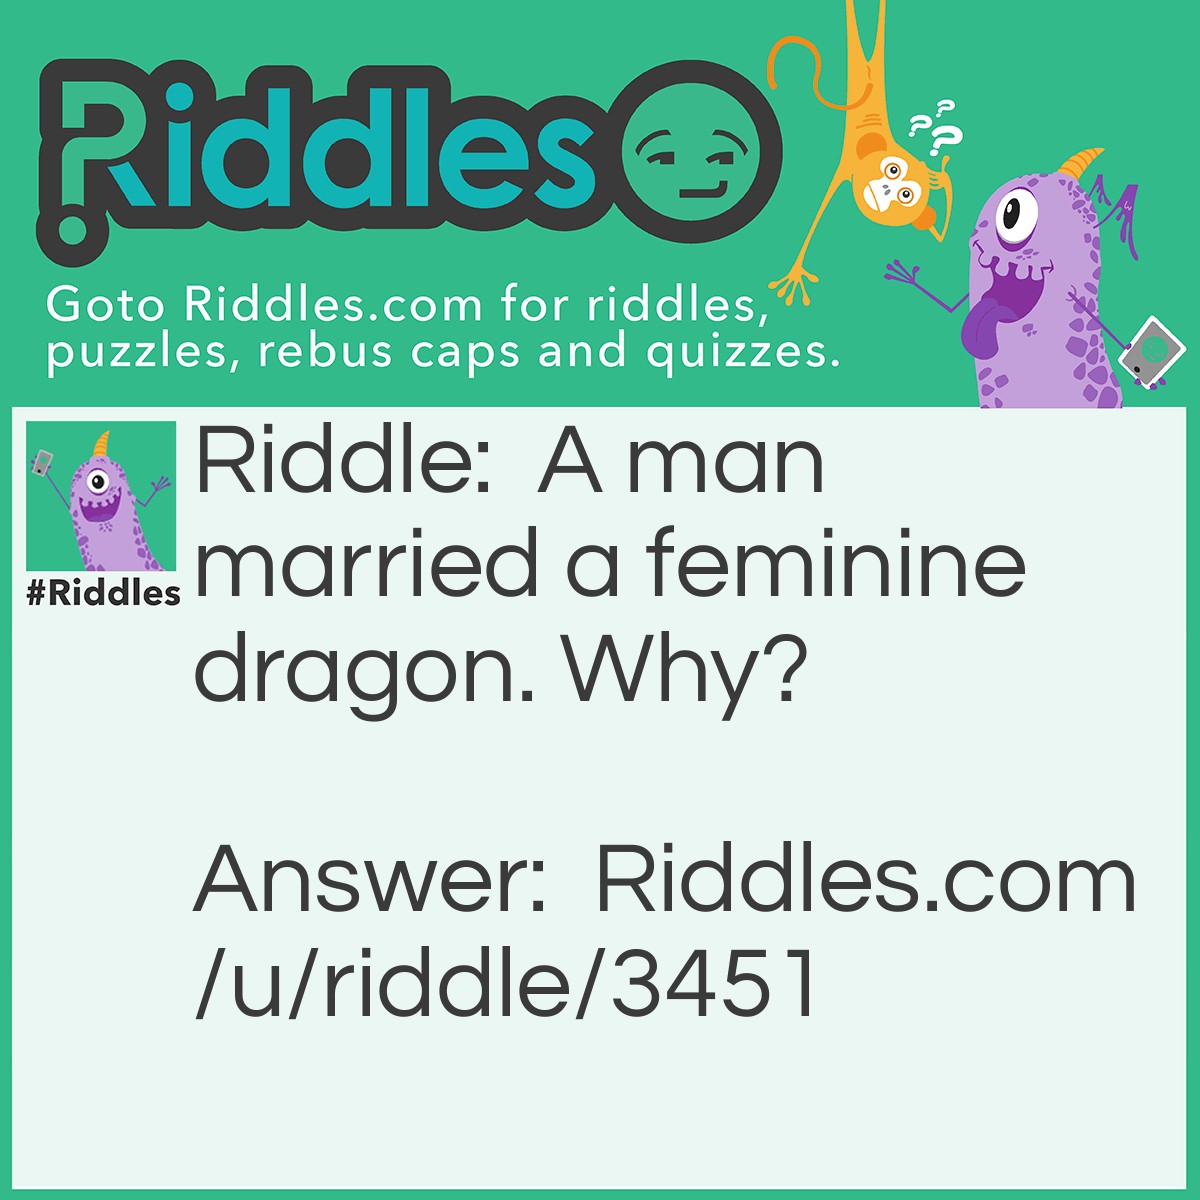 Riddle: A man married a feminine dragon. Why? Answer: Because she was so hot!